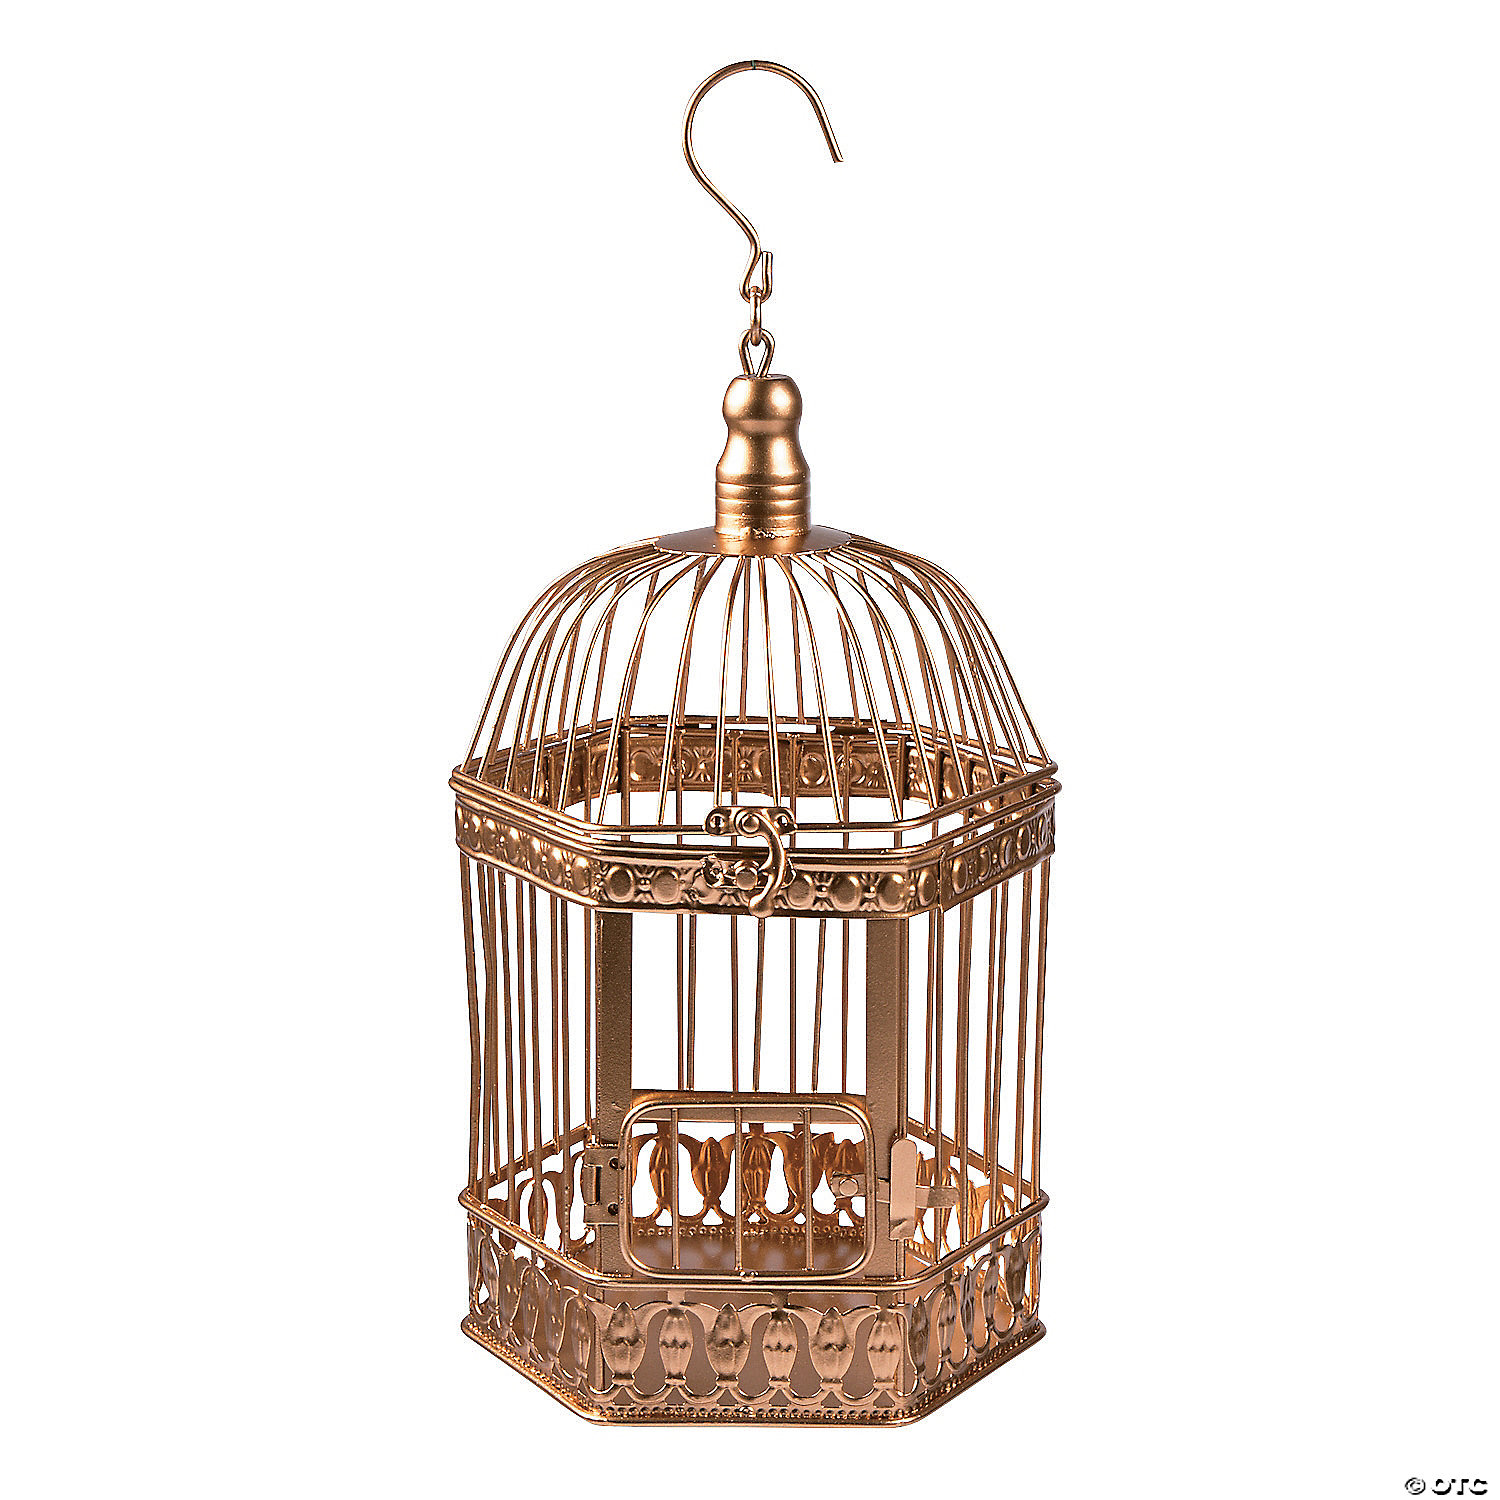 little wire bird cages ornaments